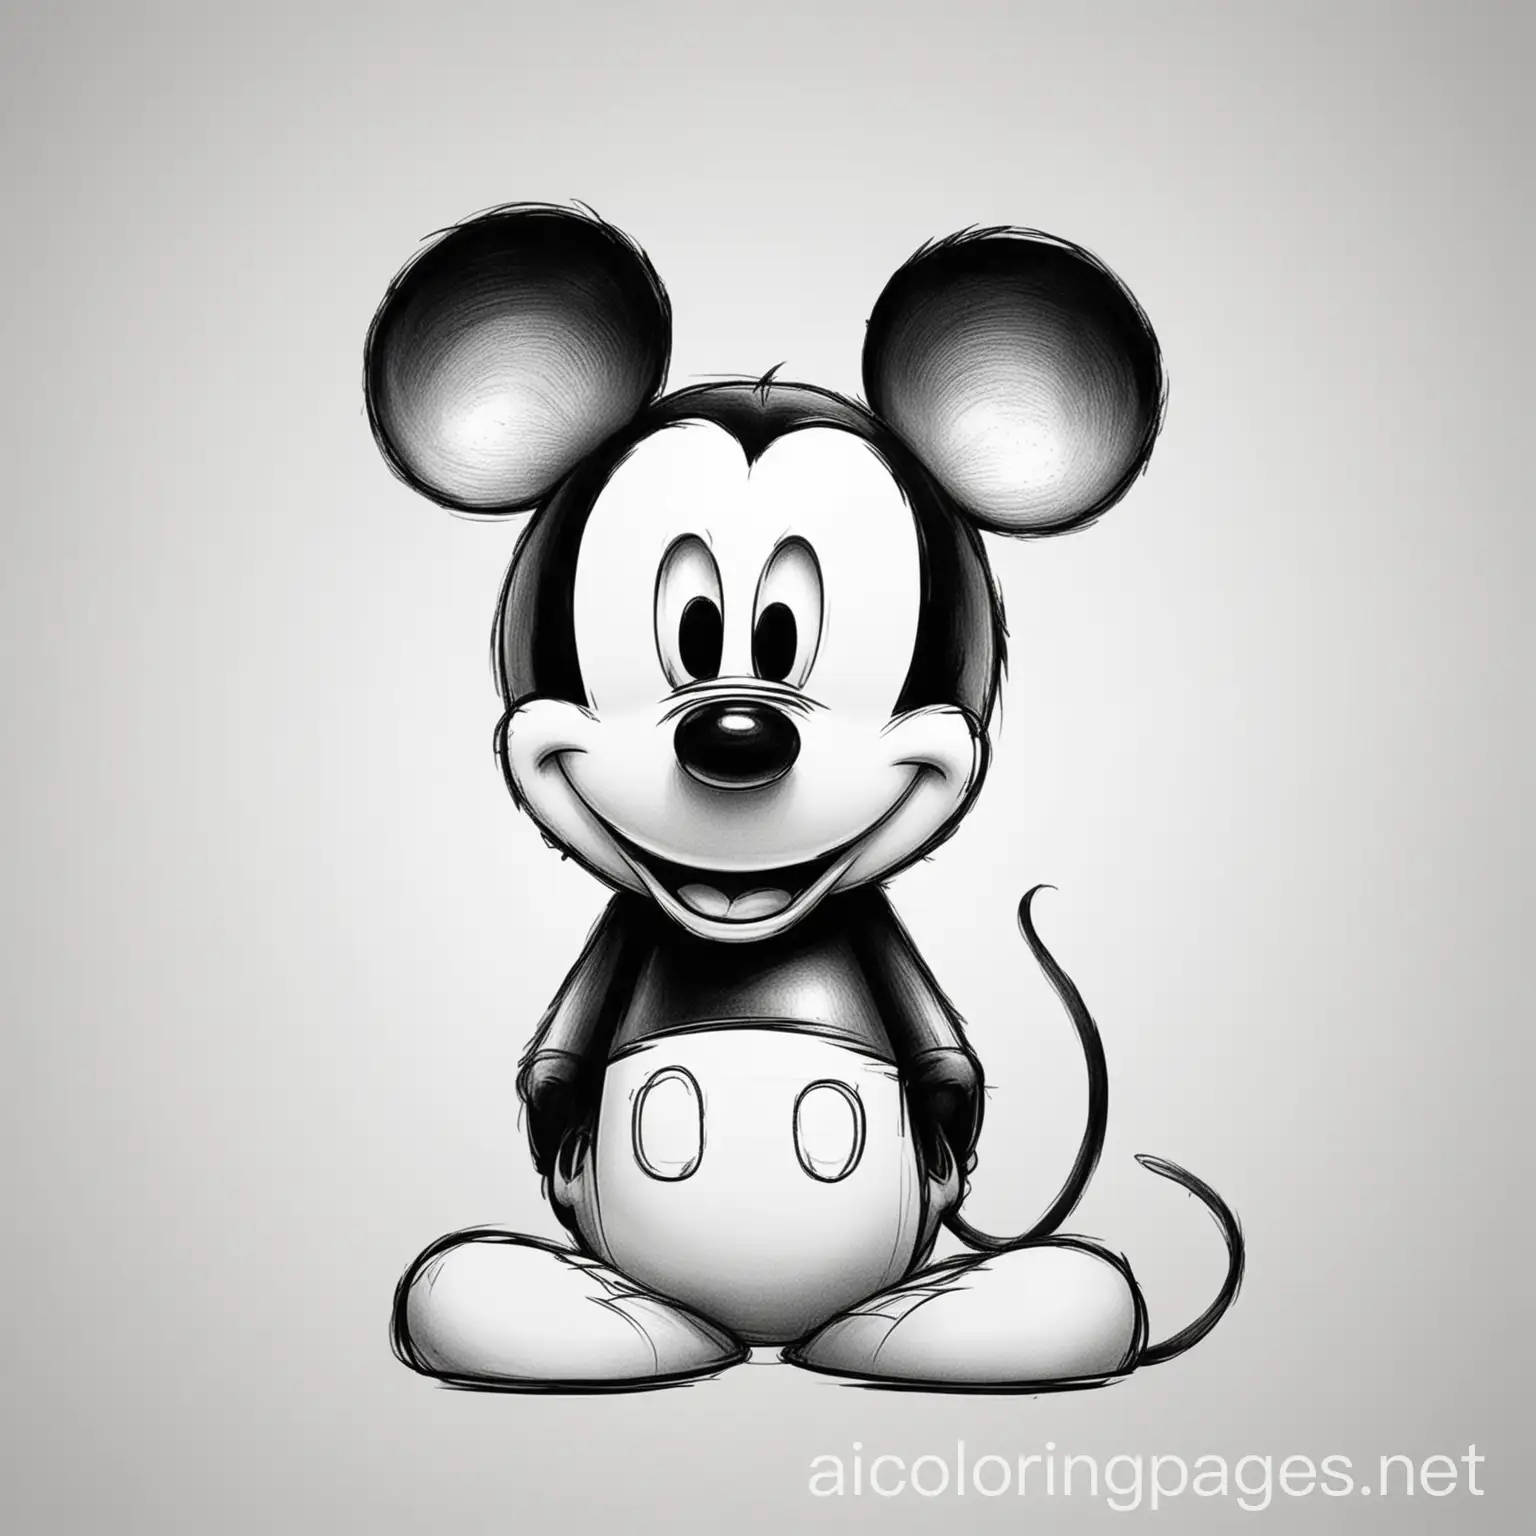 Mickey-Mouse-Coloring-Page-in-Black-and-White-Simple-Line-Art-on-White-Background